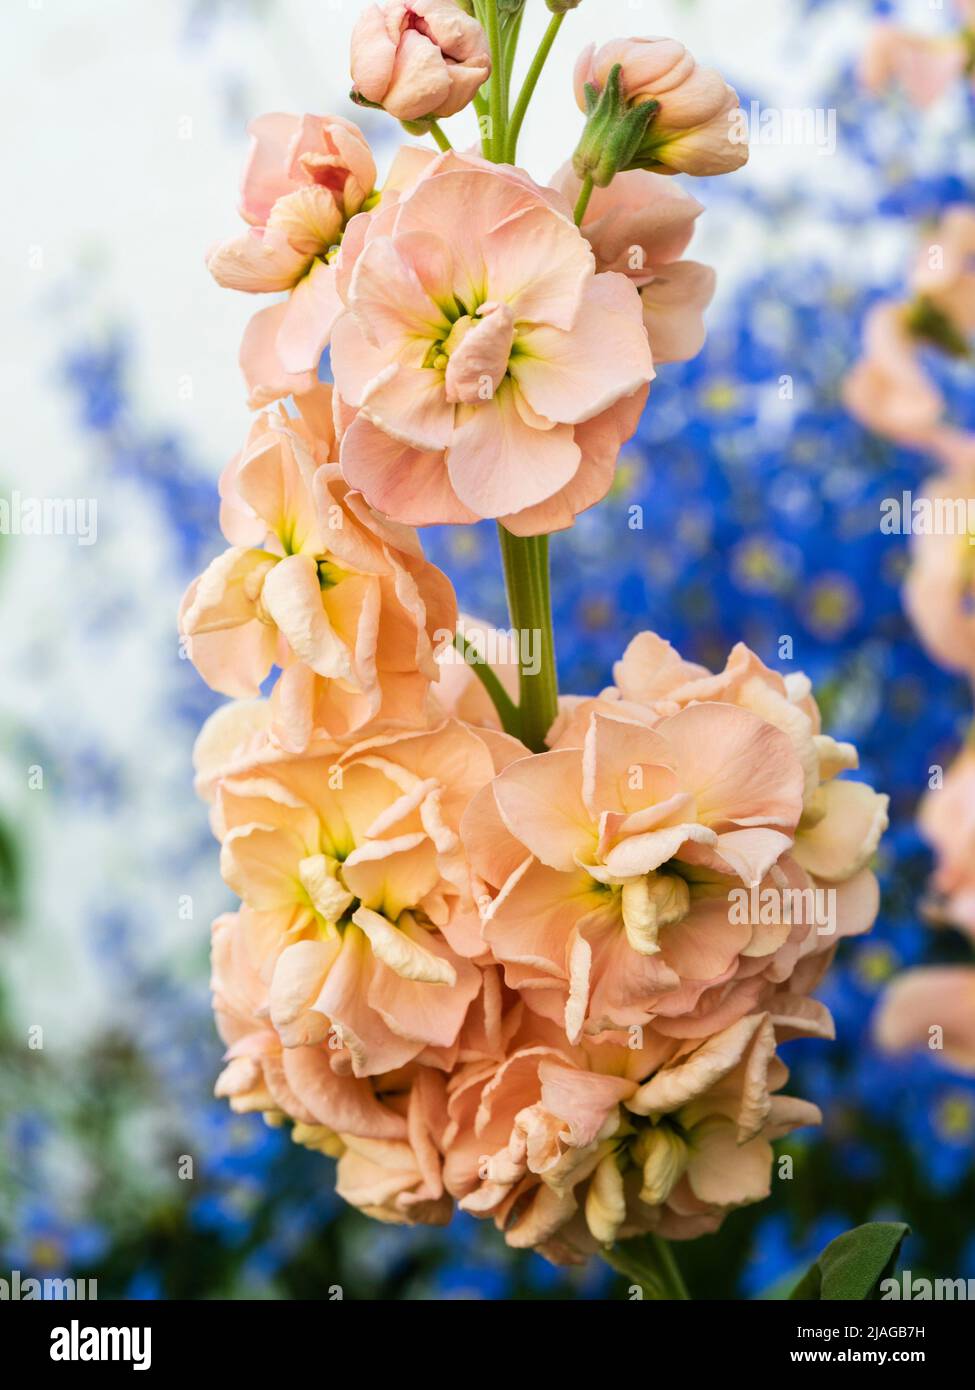 Pale pink double flowers of the hardy annual or biennial fragrant garden stock, Matthiola incana 'Apricot' Stock Photo